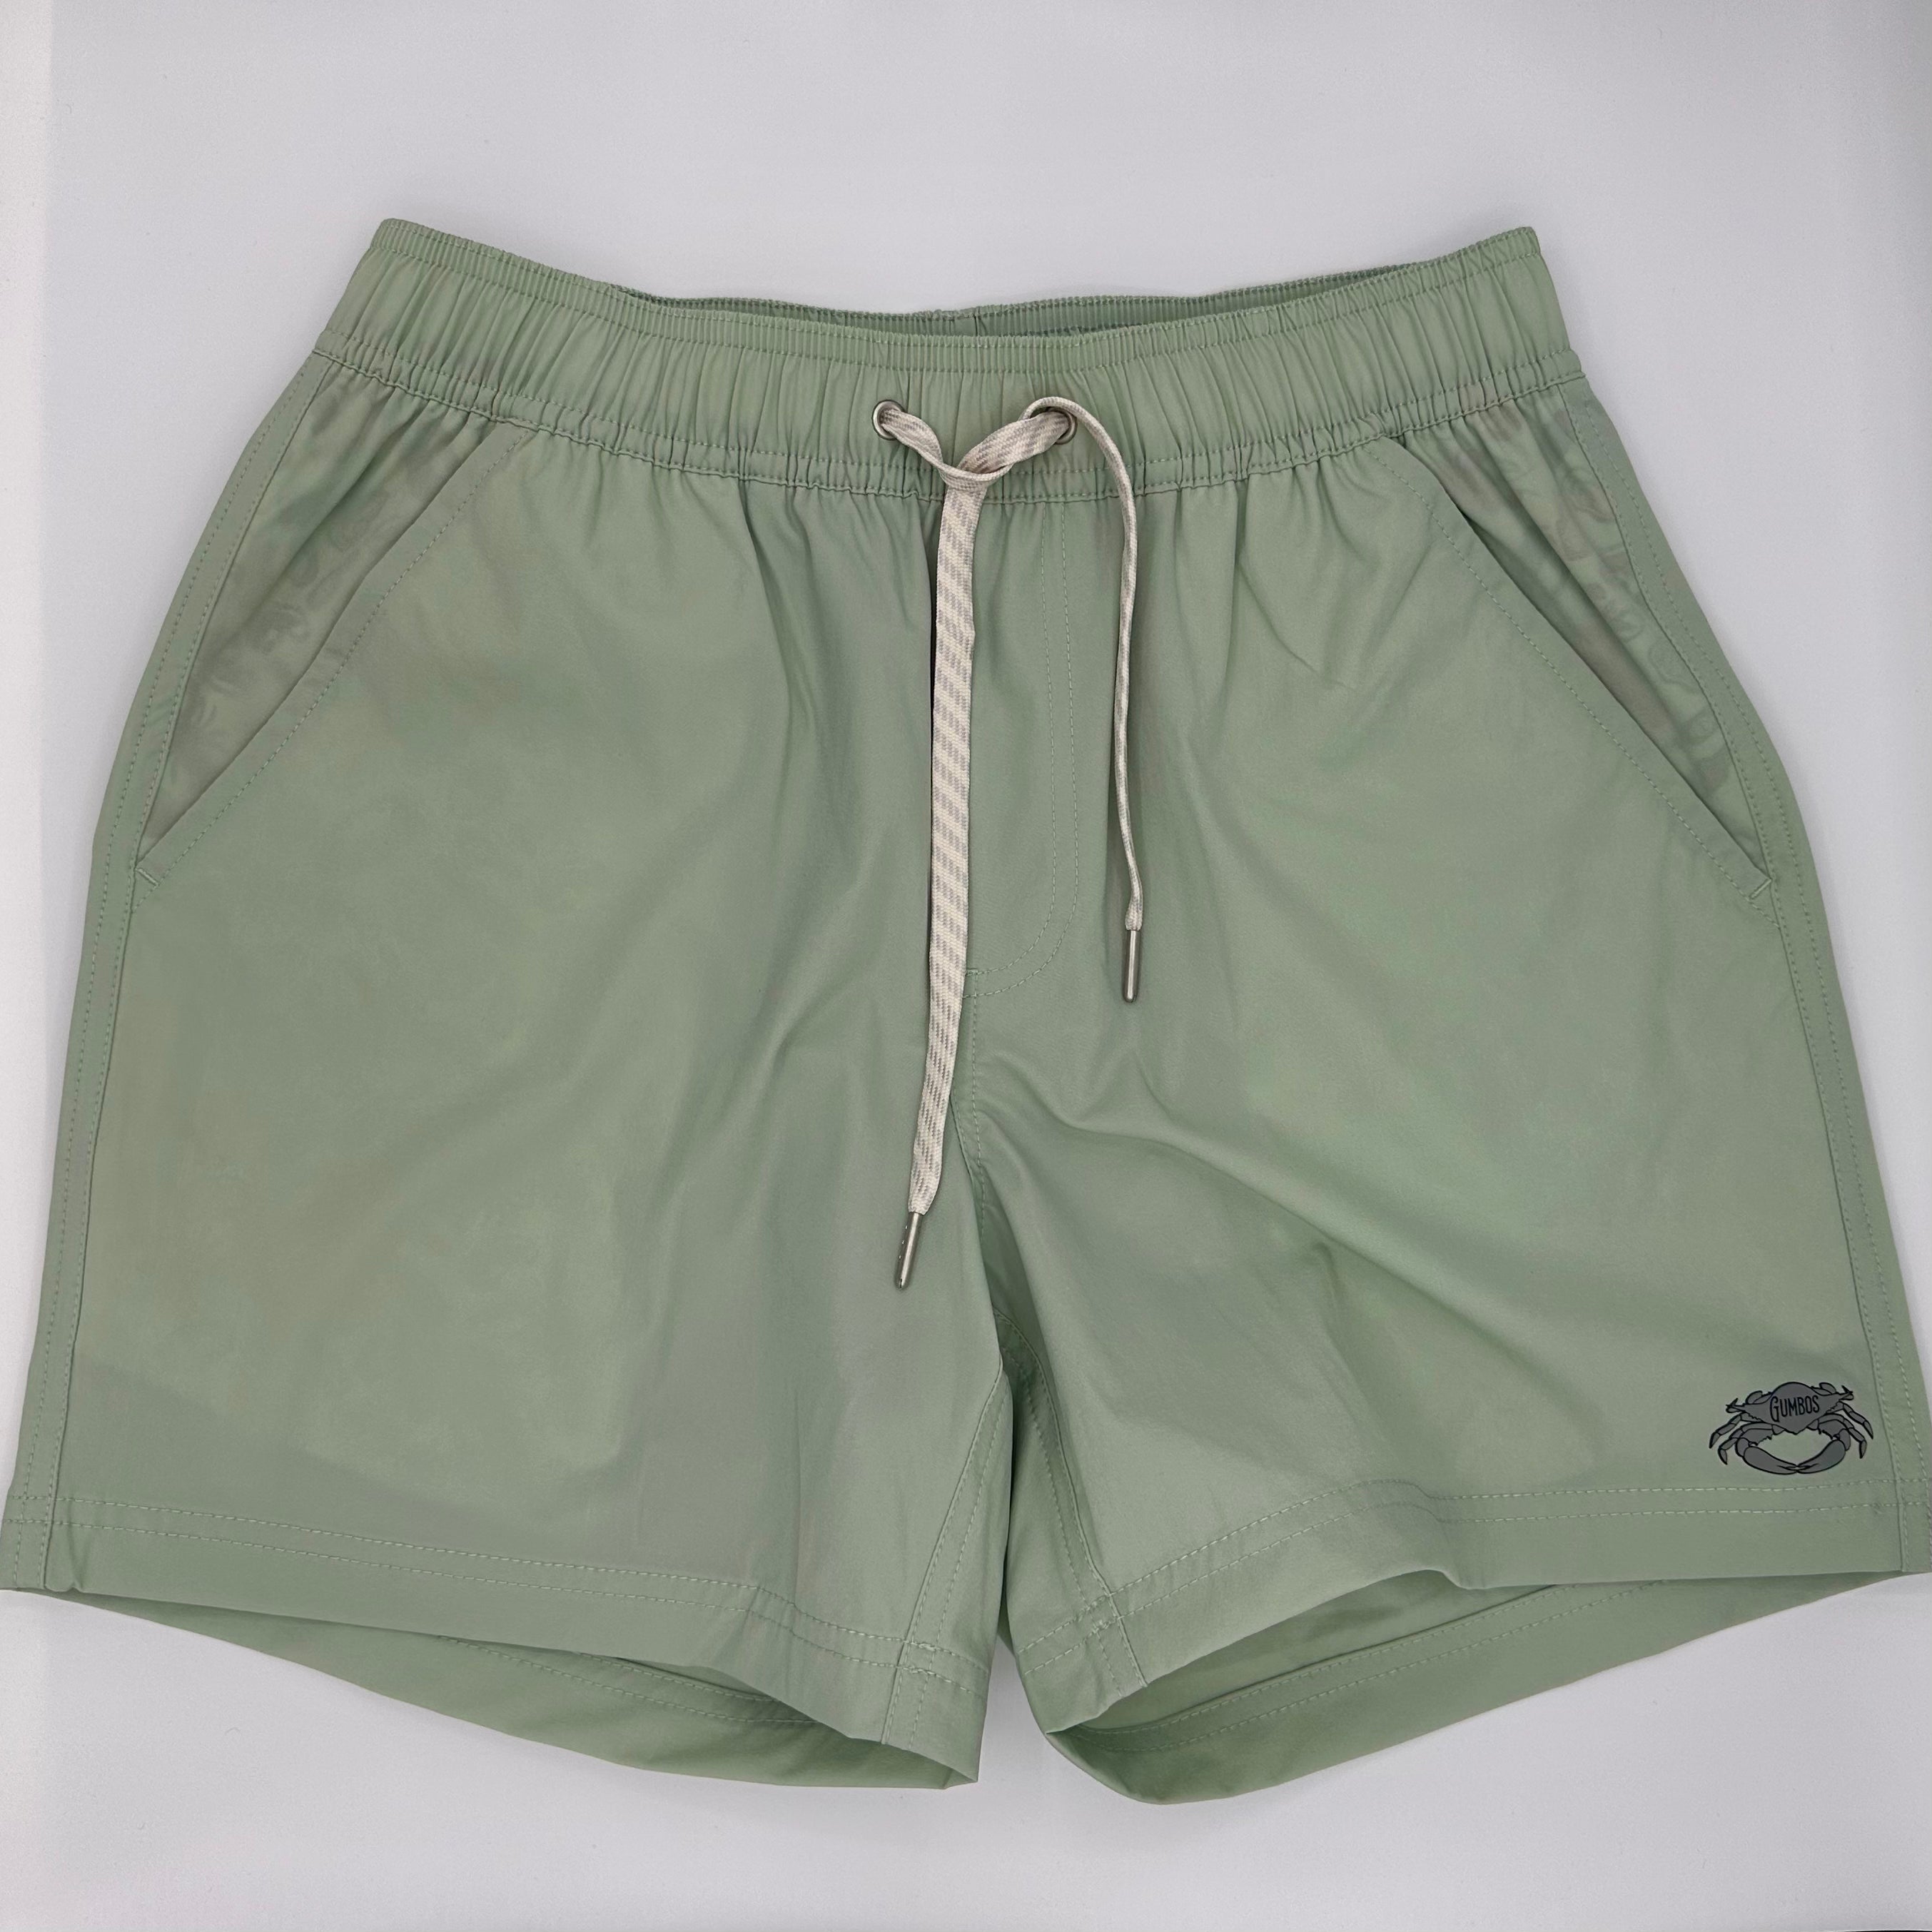 Gumbos Active Shorts 5" Inseam with Liner